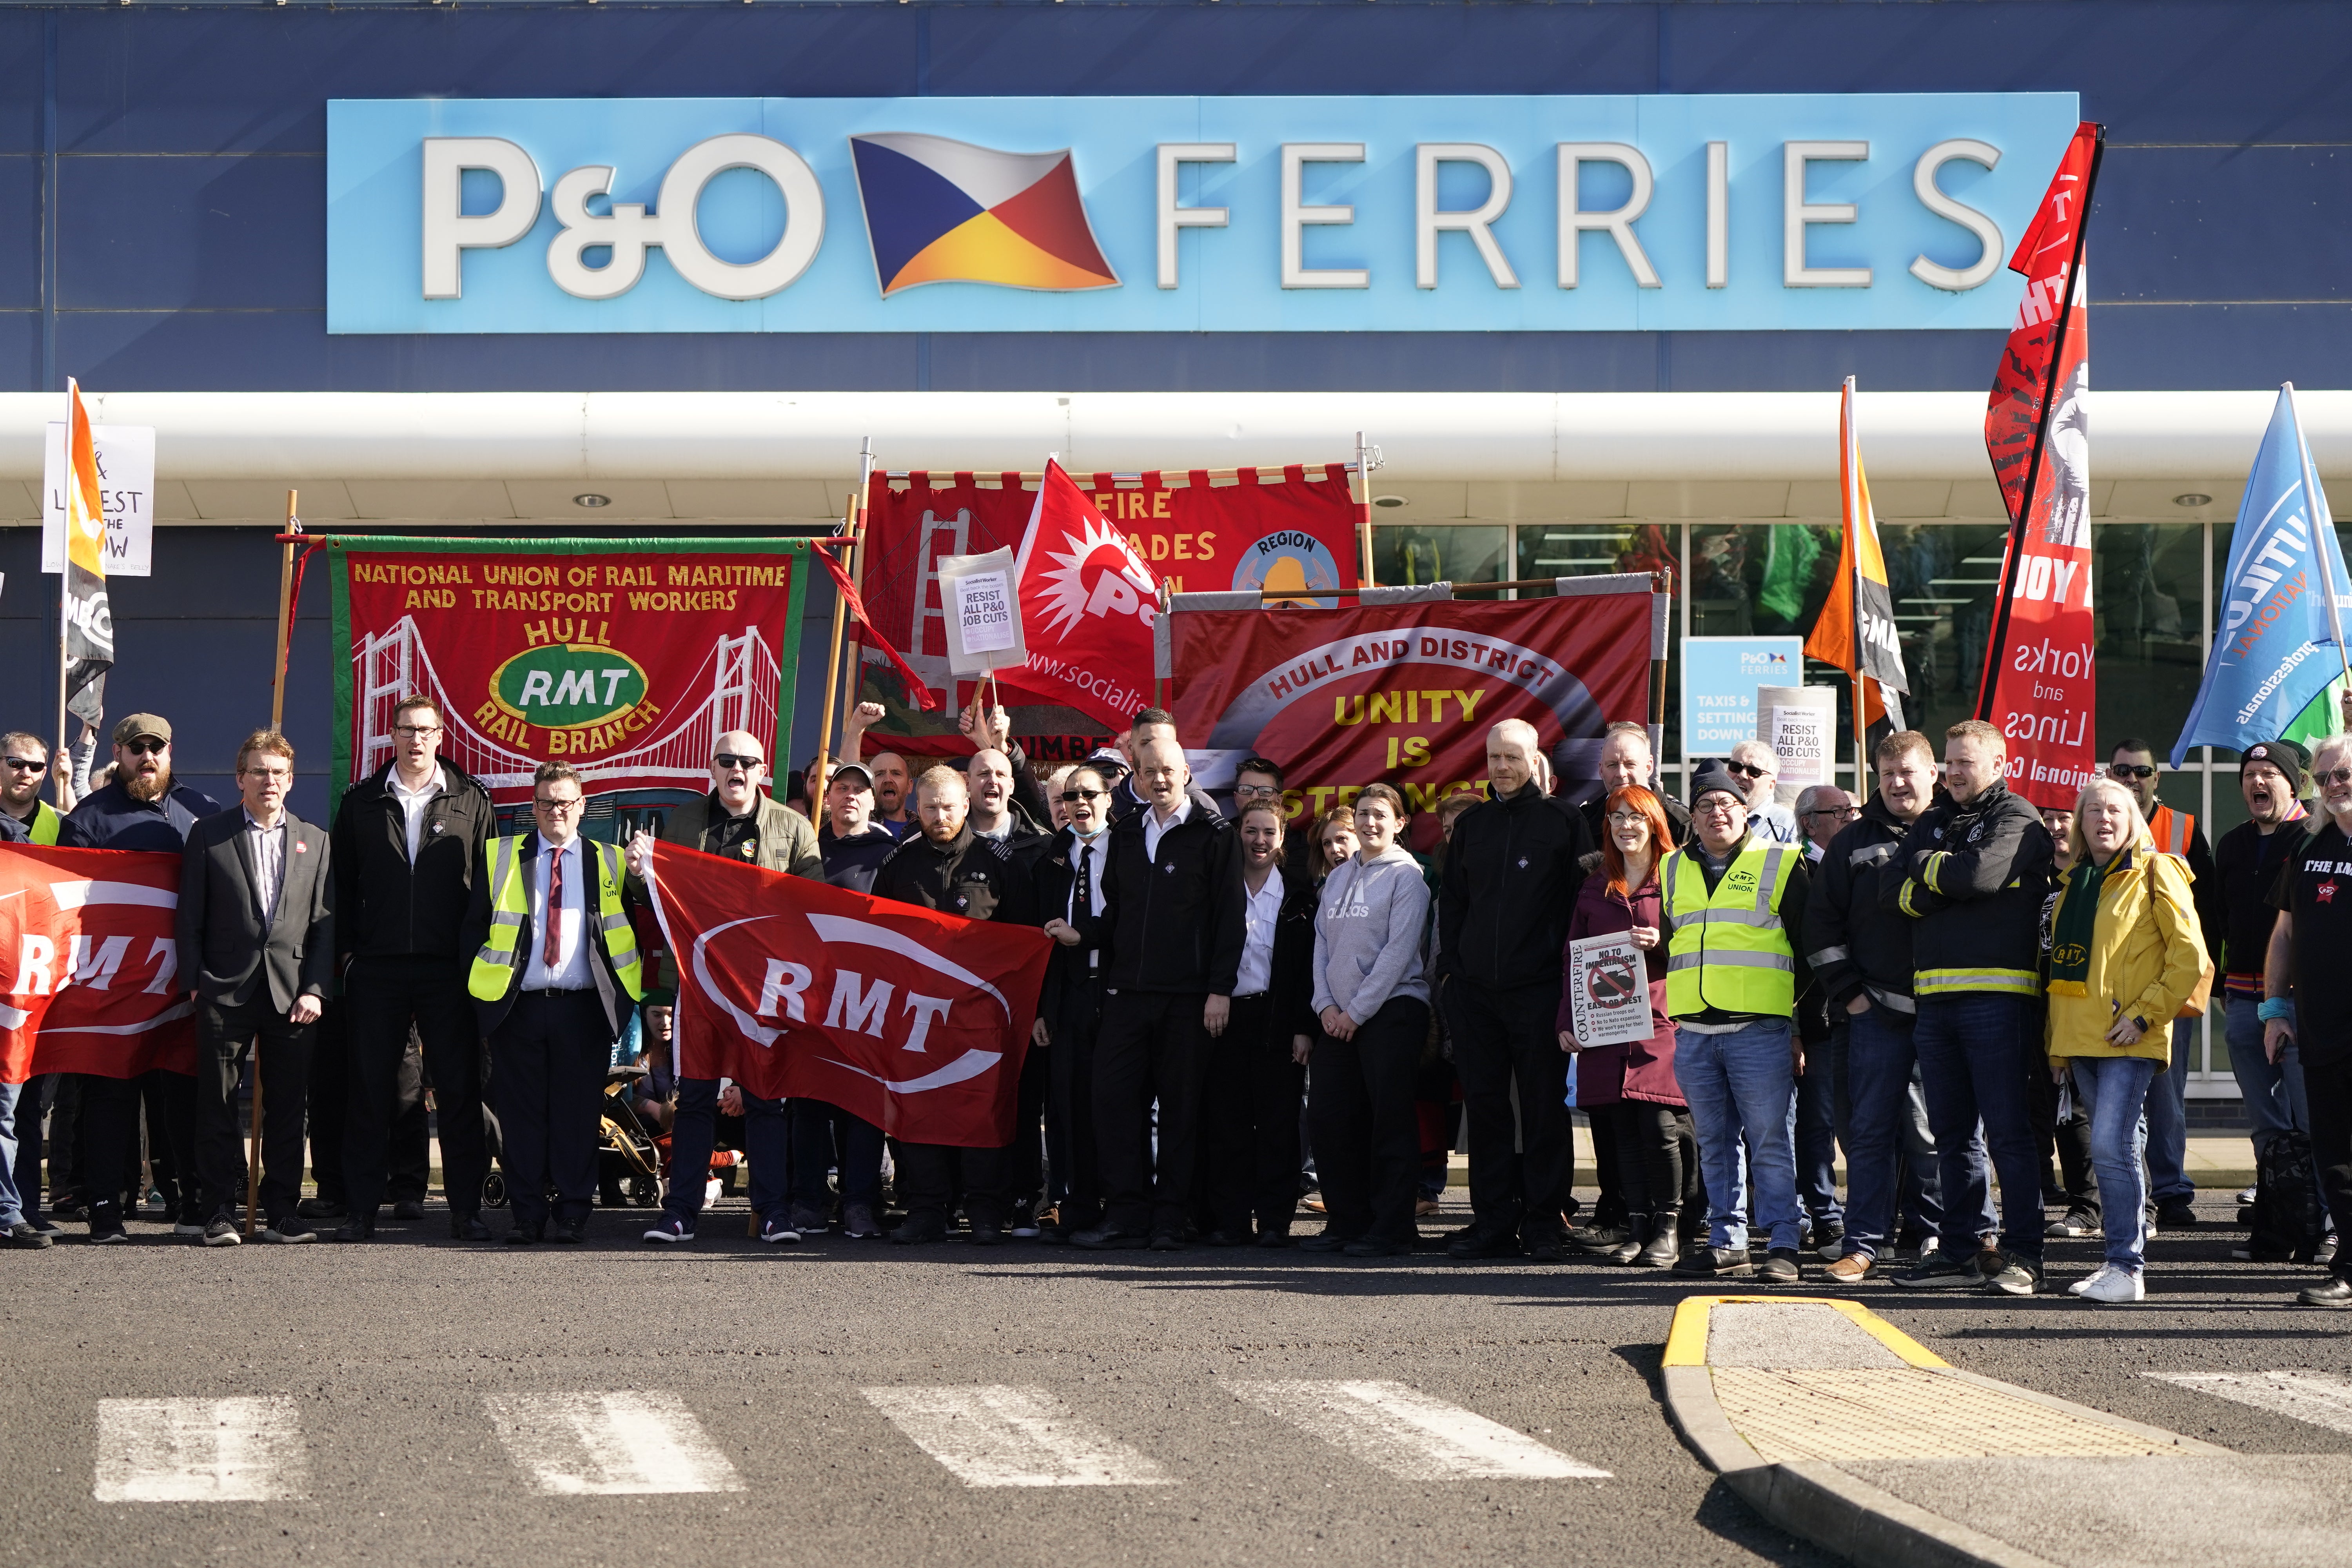 Protesters stand outside the P&O building at the Port of Hull, East Yorkshire (Danny Lawson/PA)